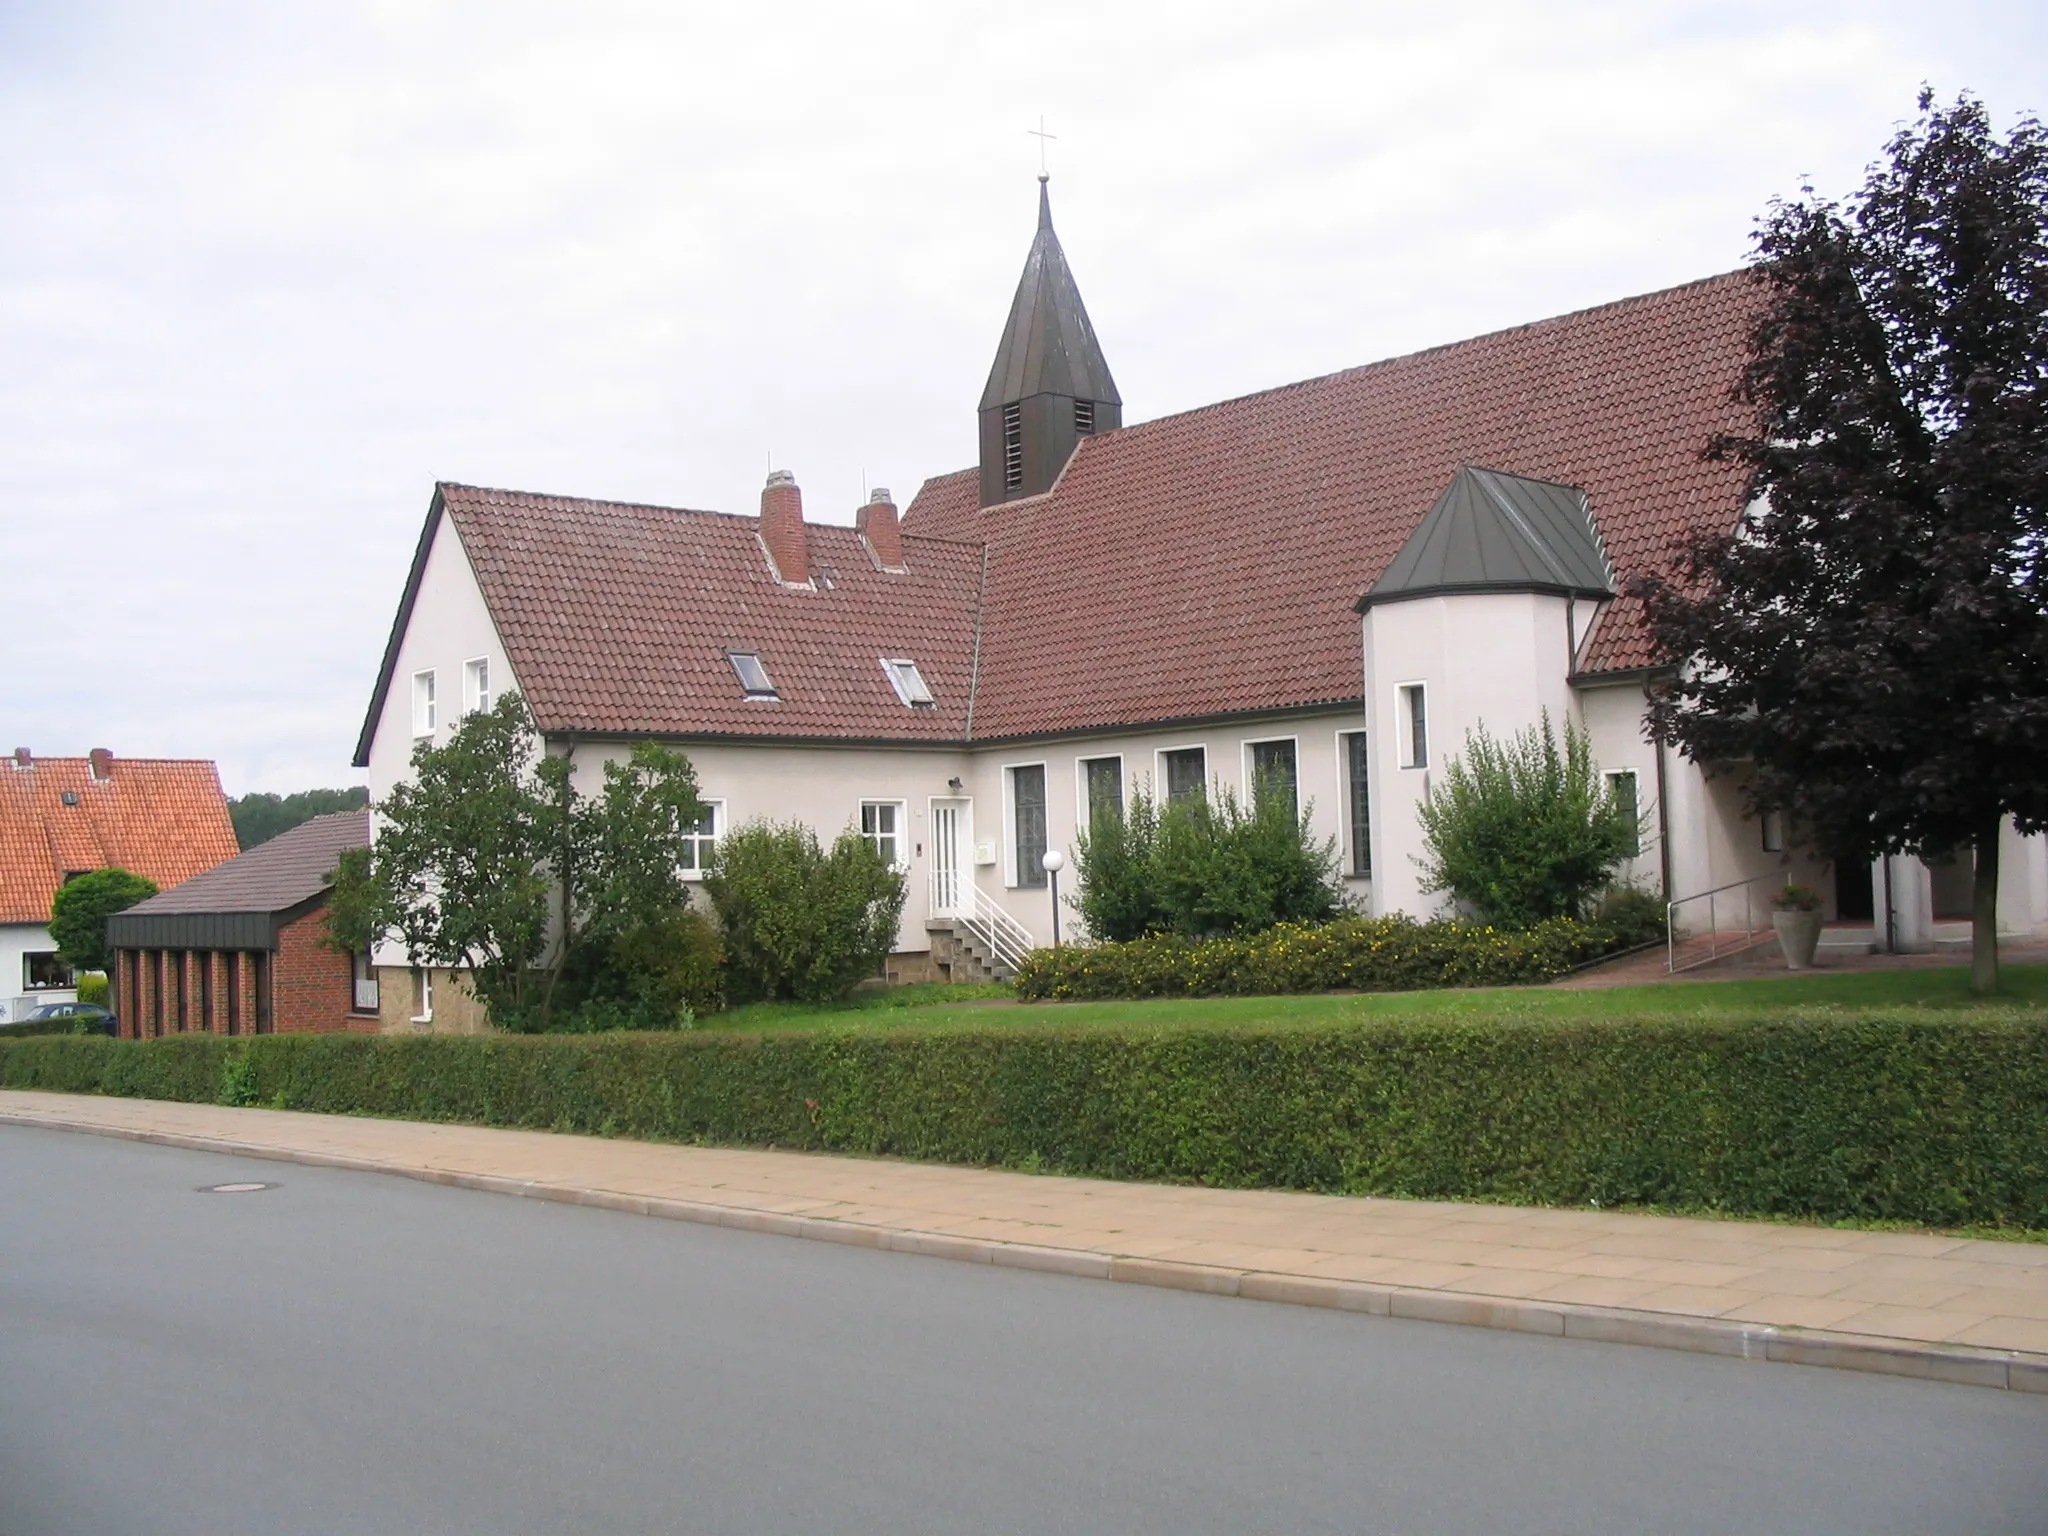 Photo showing: Church in town of Spenge, District of Herford, North Rhine-Westphalia, Germany.